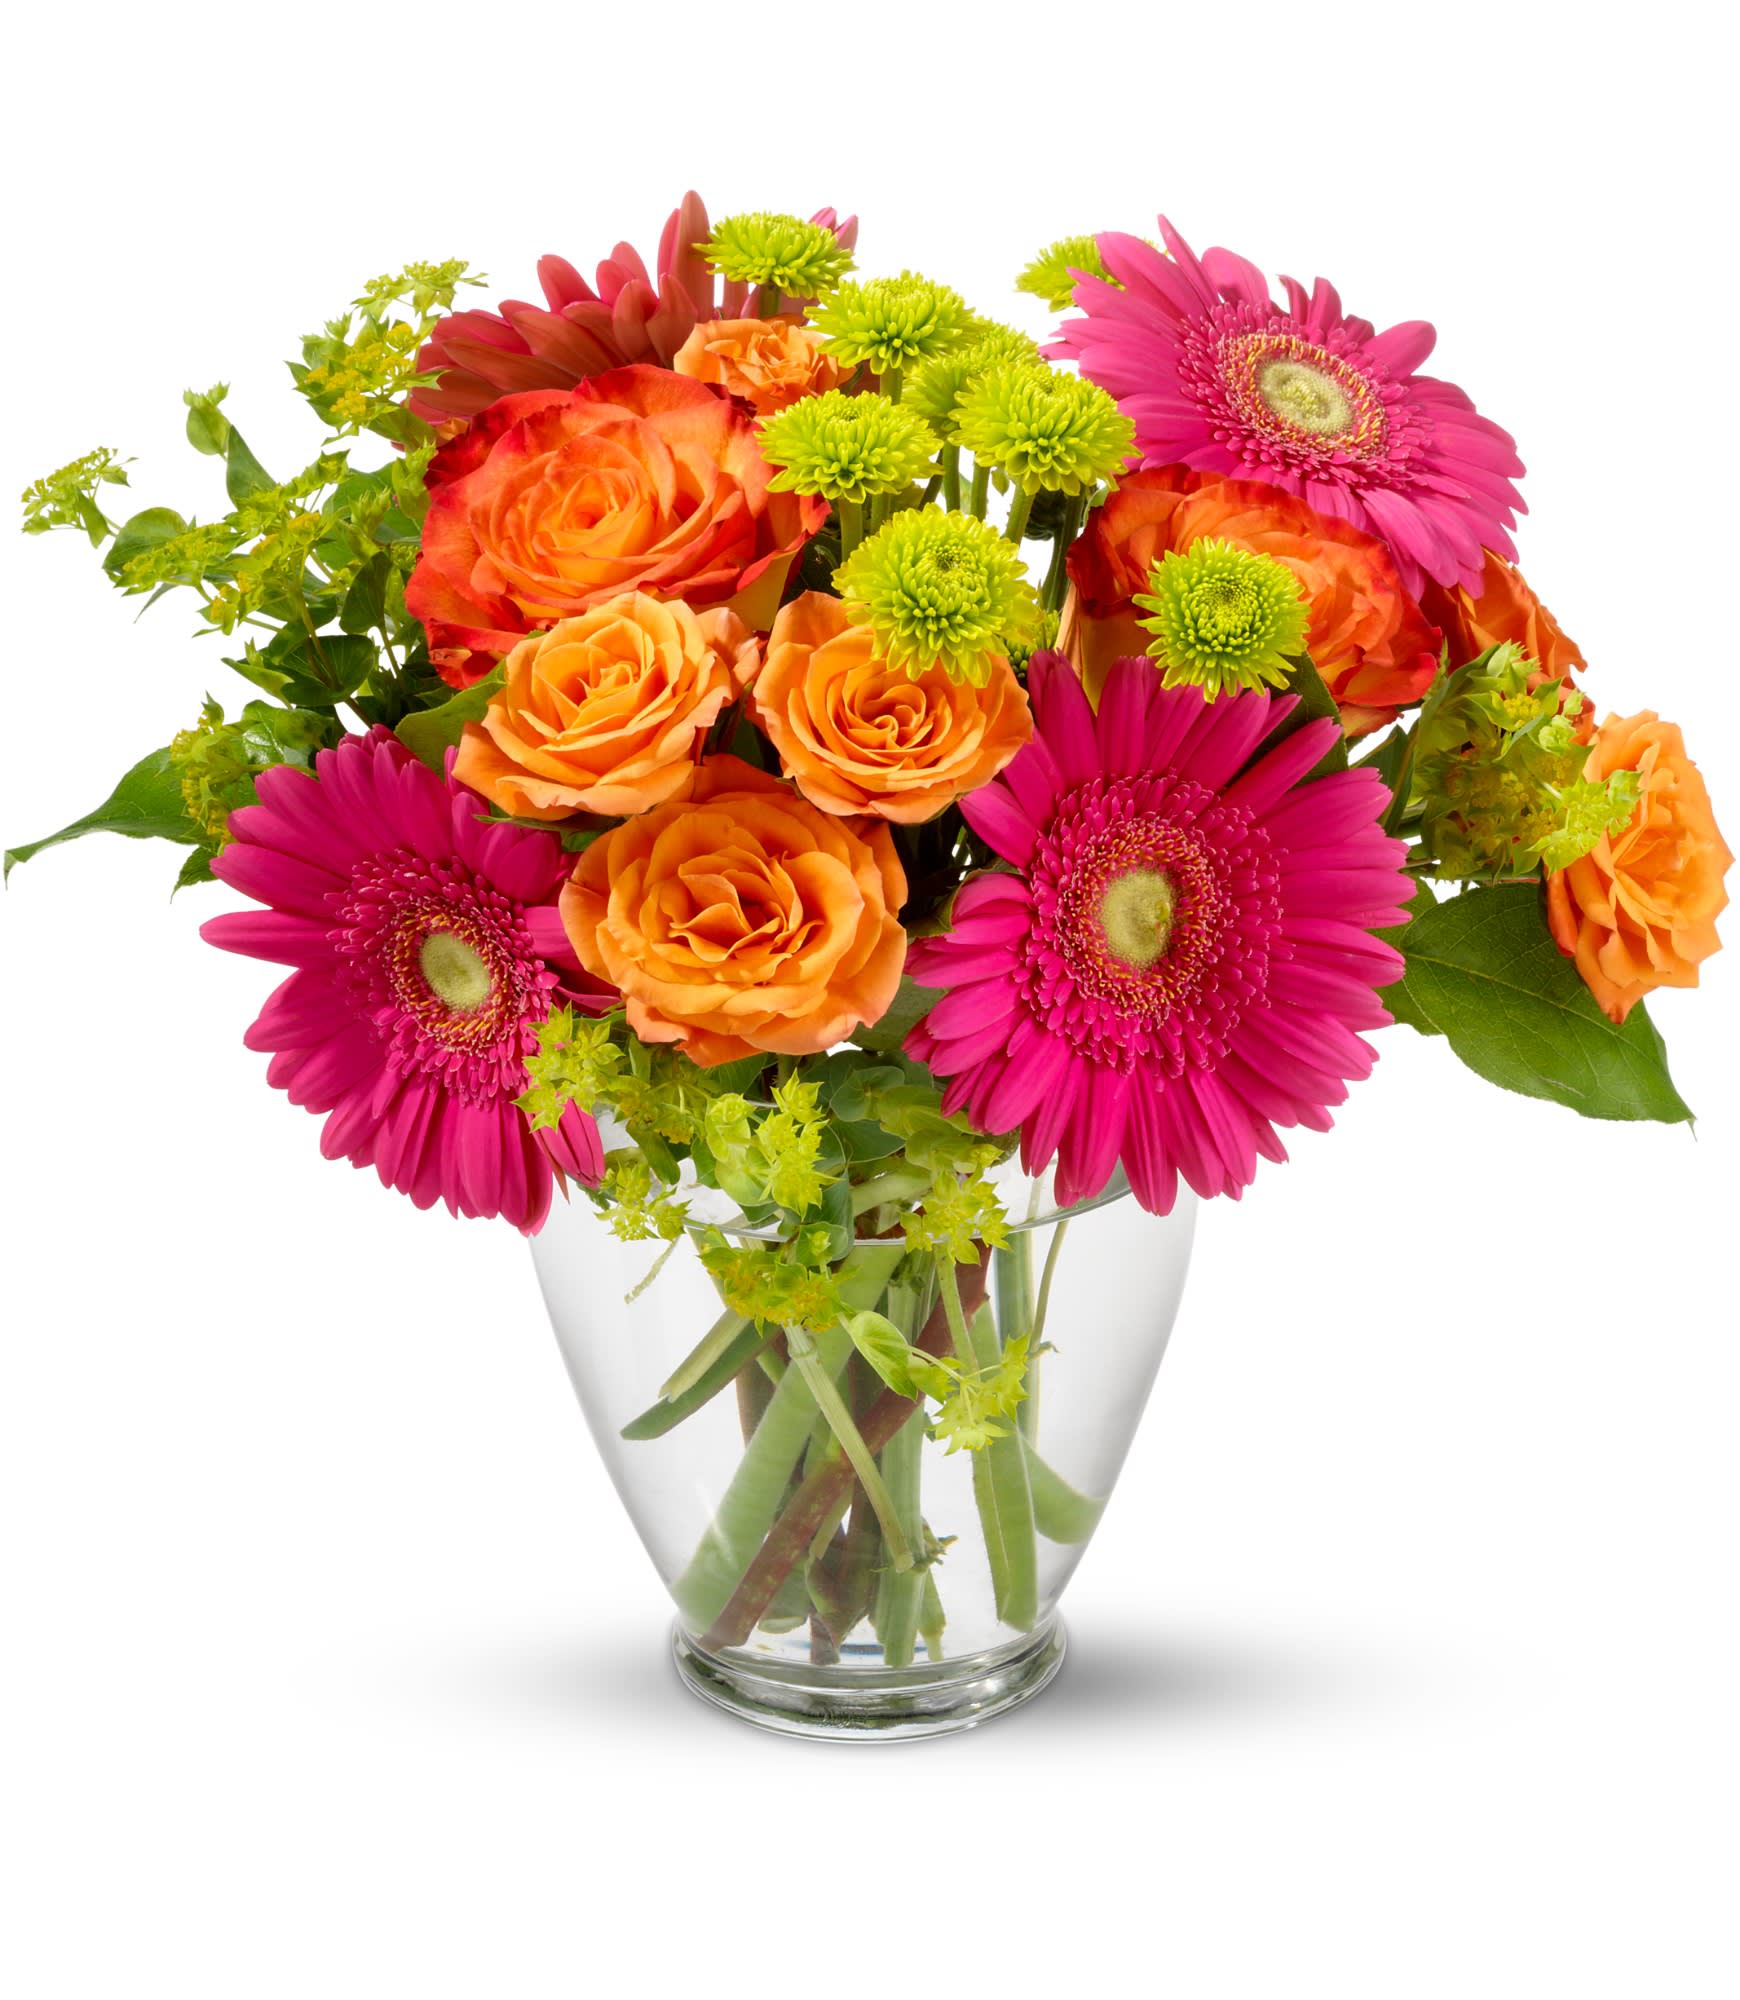 End of the Rainbow by Teleflora - Hot fun in the summertime is here, and it's flowerific to be sure! This beautiful bouquet brings together a rainbow of the season's brightest blossoms.